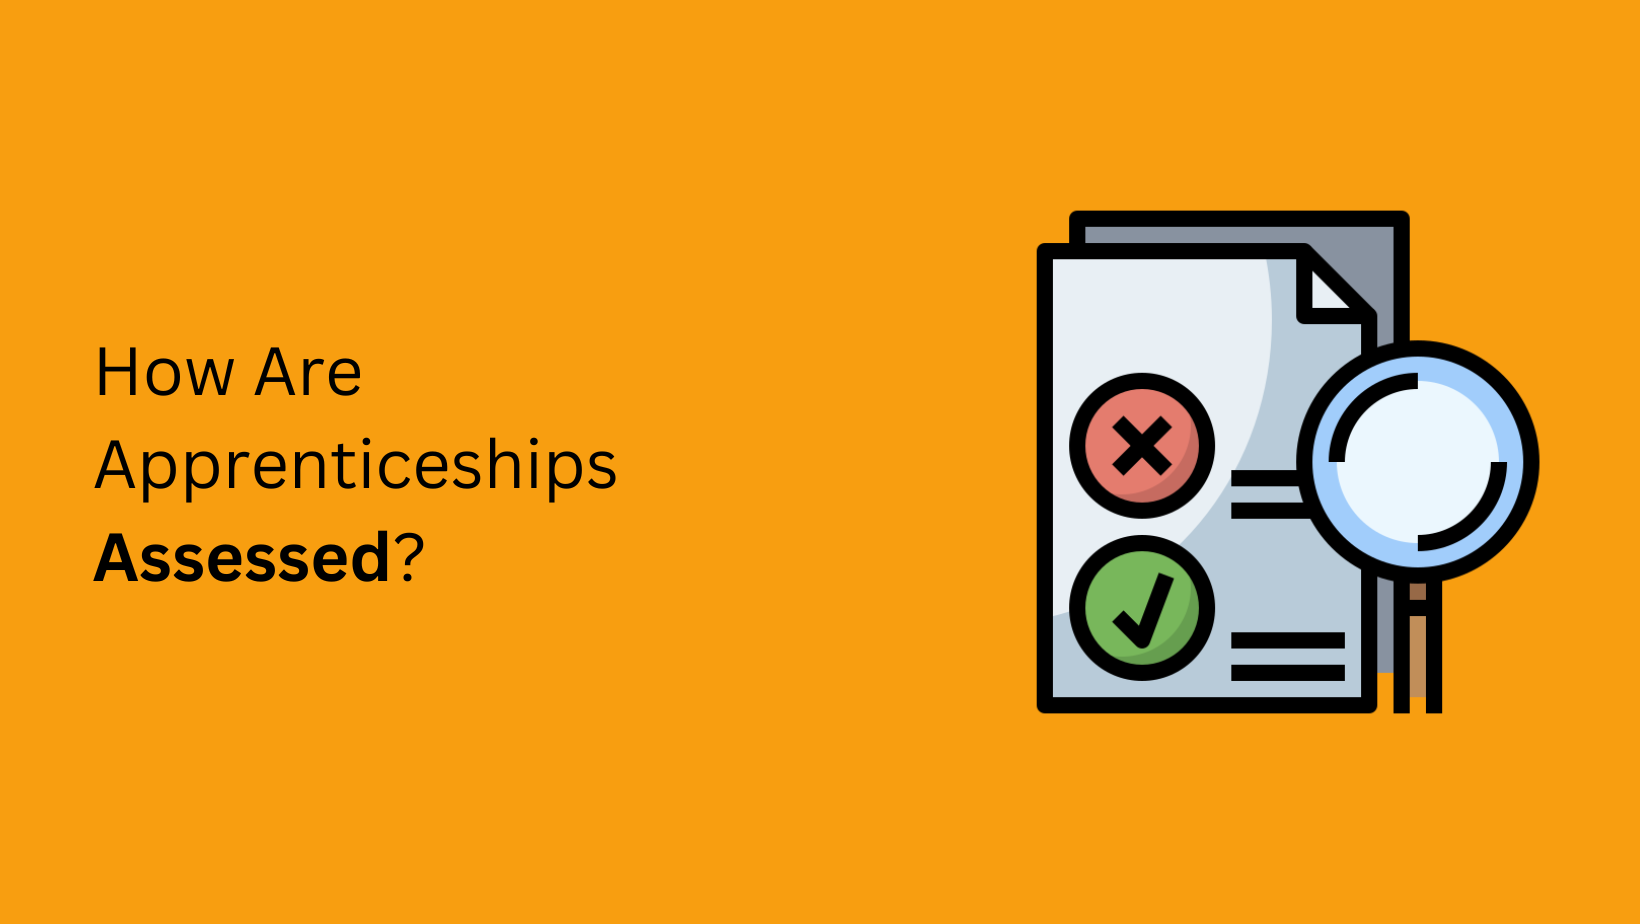 How Are Apprenticeships Assessed